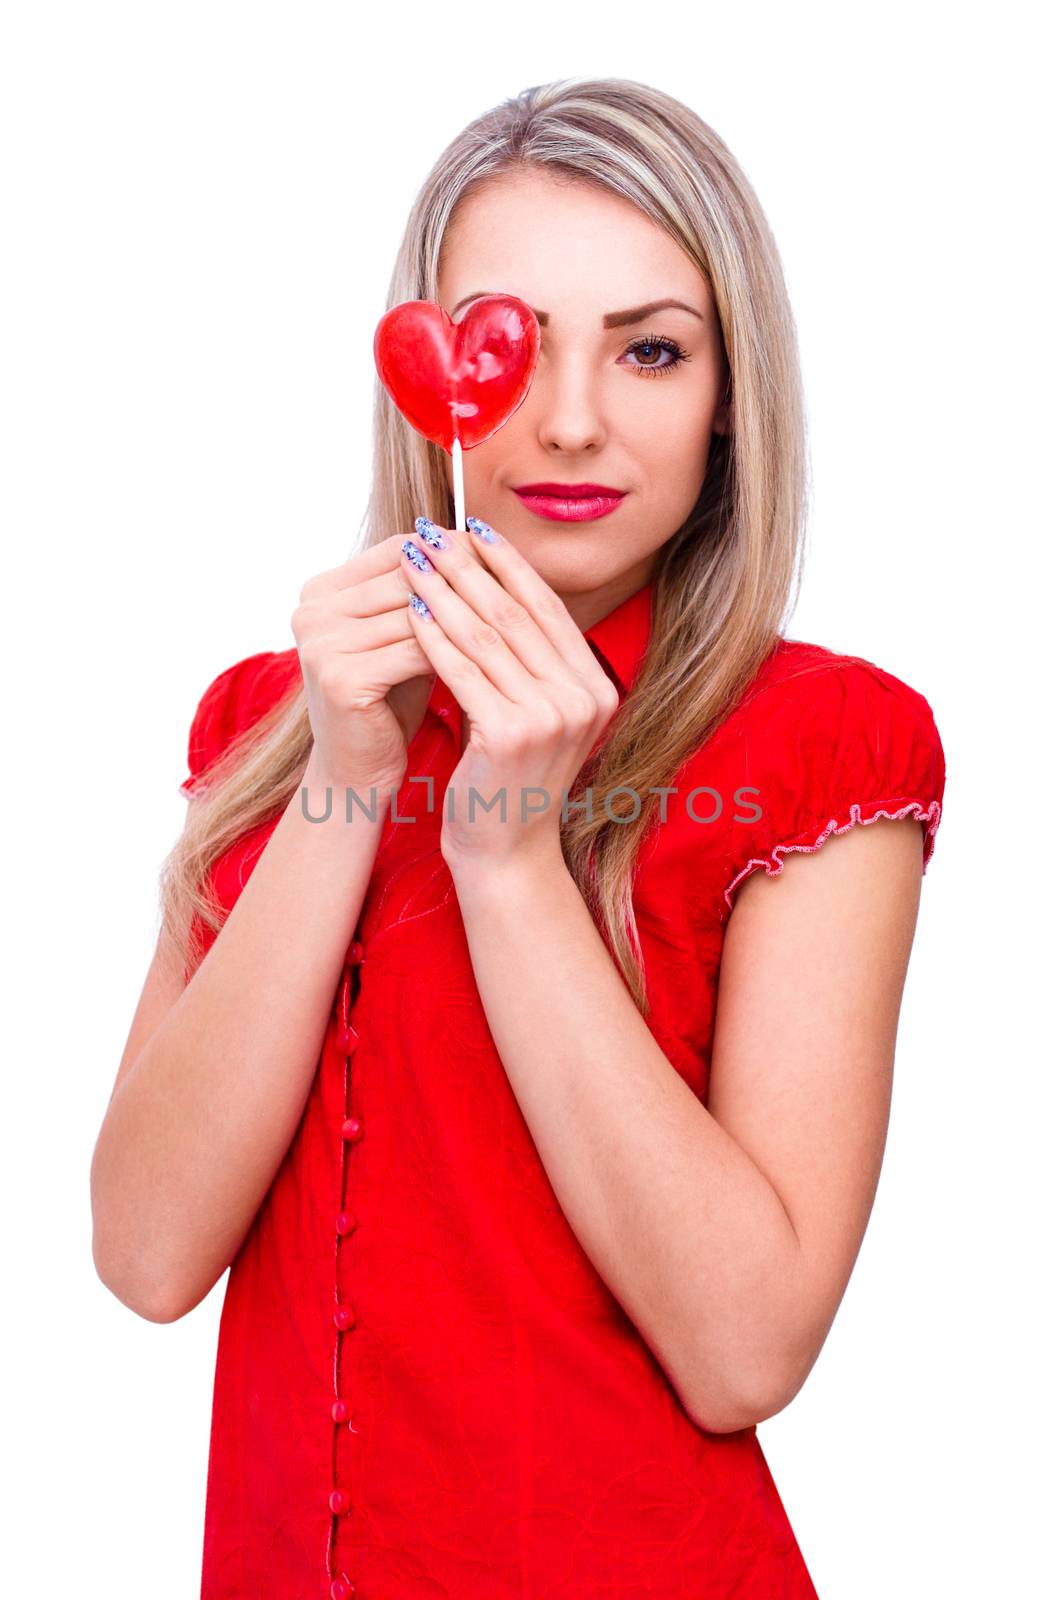 Beautiful young woman holding heart shape lollipop in front of her eye, isolated on white
